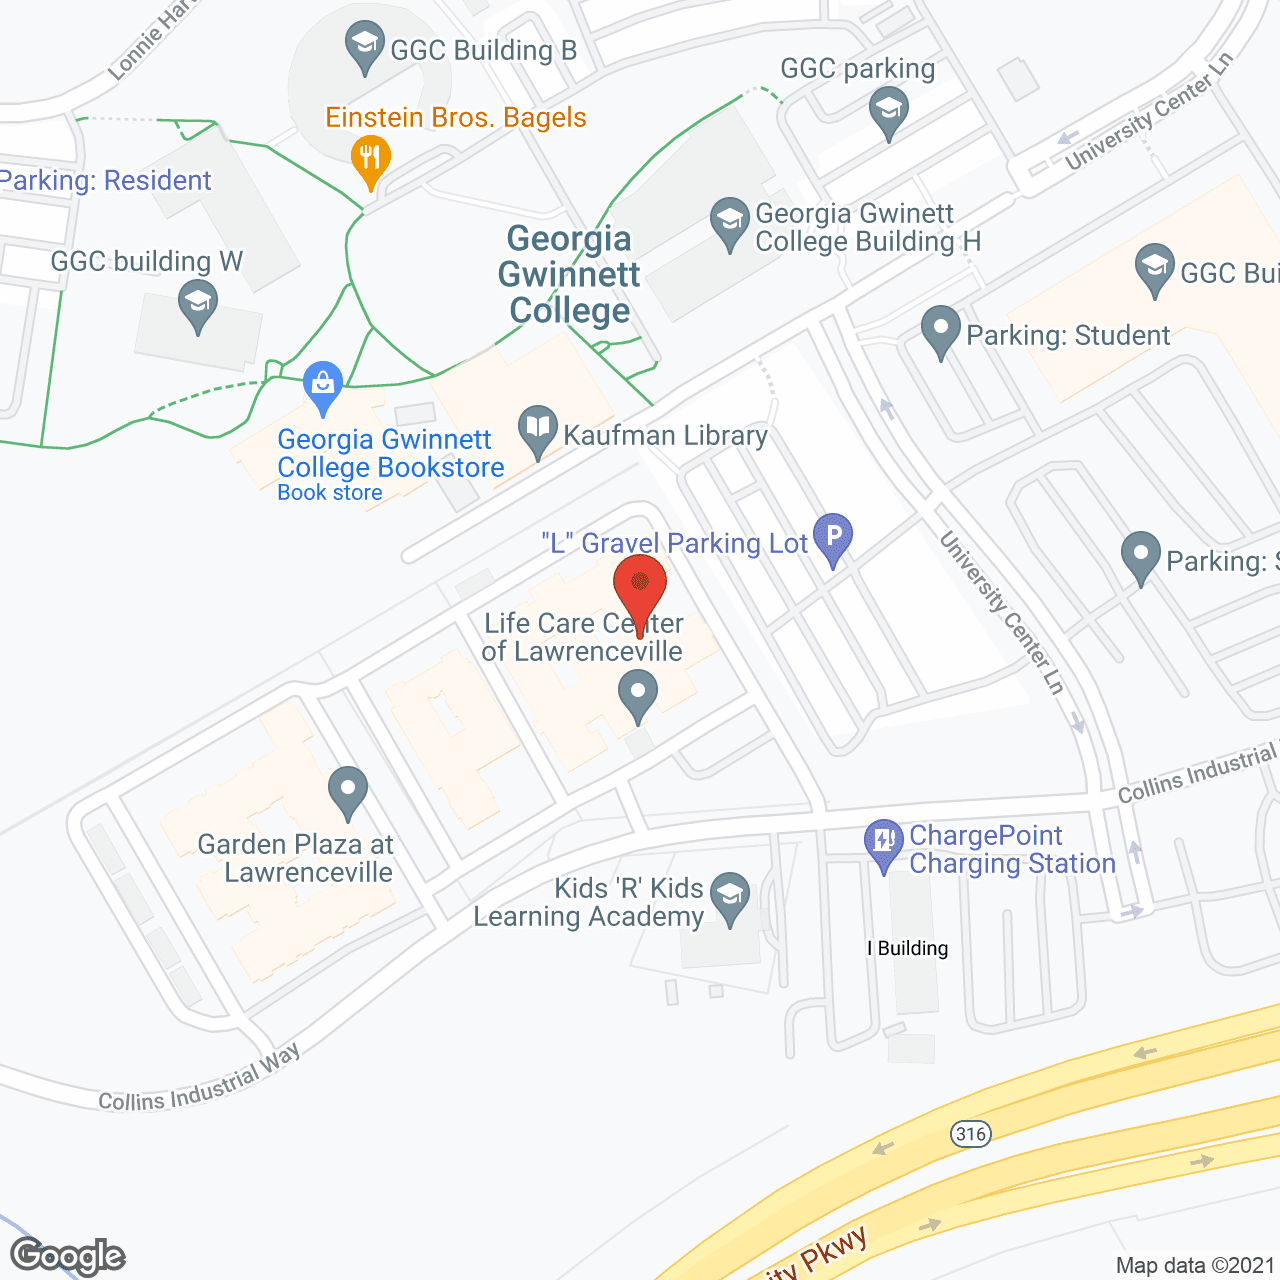 Life Care Ctr of Lawrenceville in google map